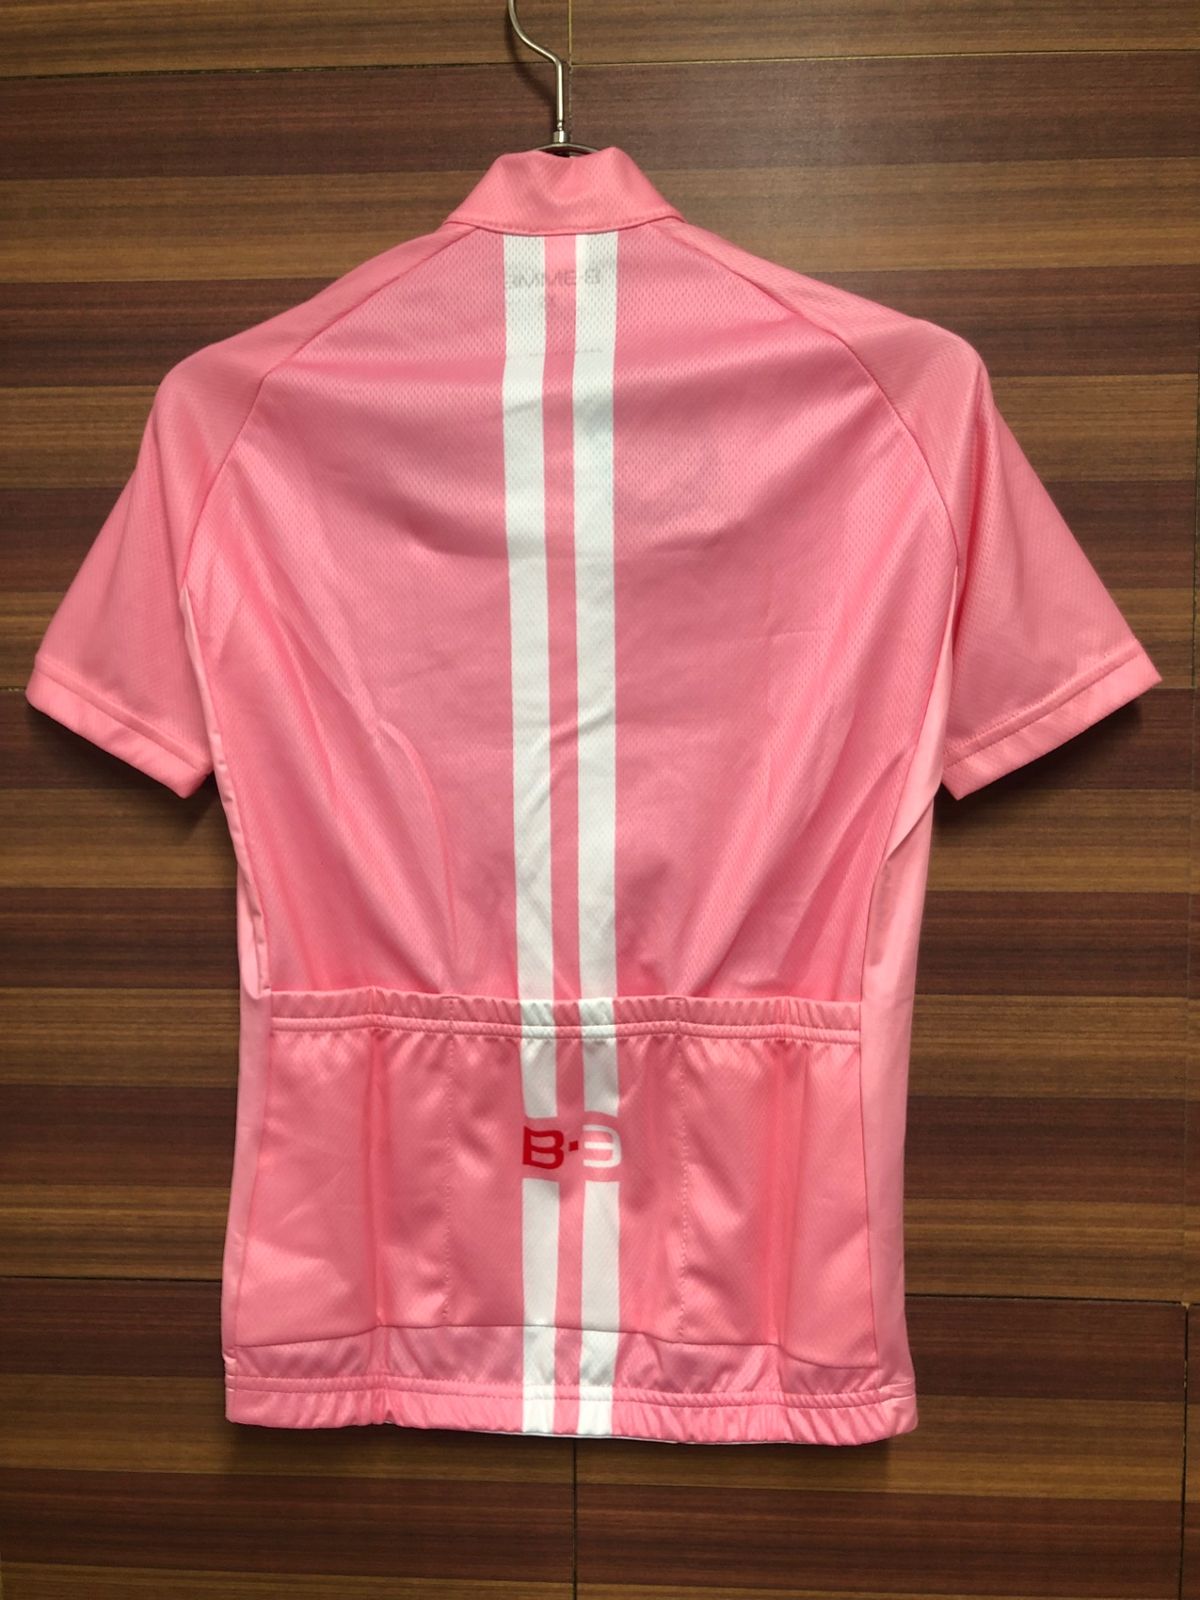 HO955 ビエンメ BIEMME 16SS ITEM TWO JERSEY サイクルジャージ LADY PINK ピンク XS